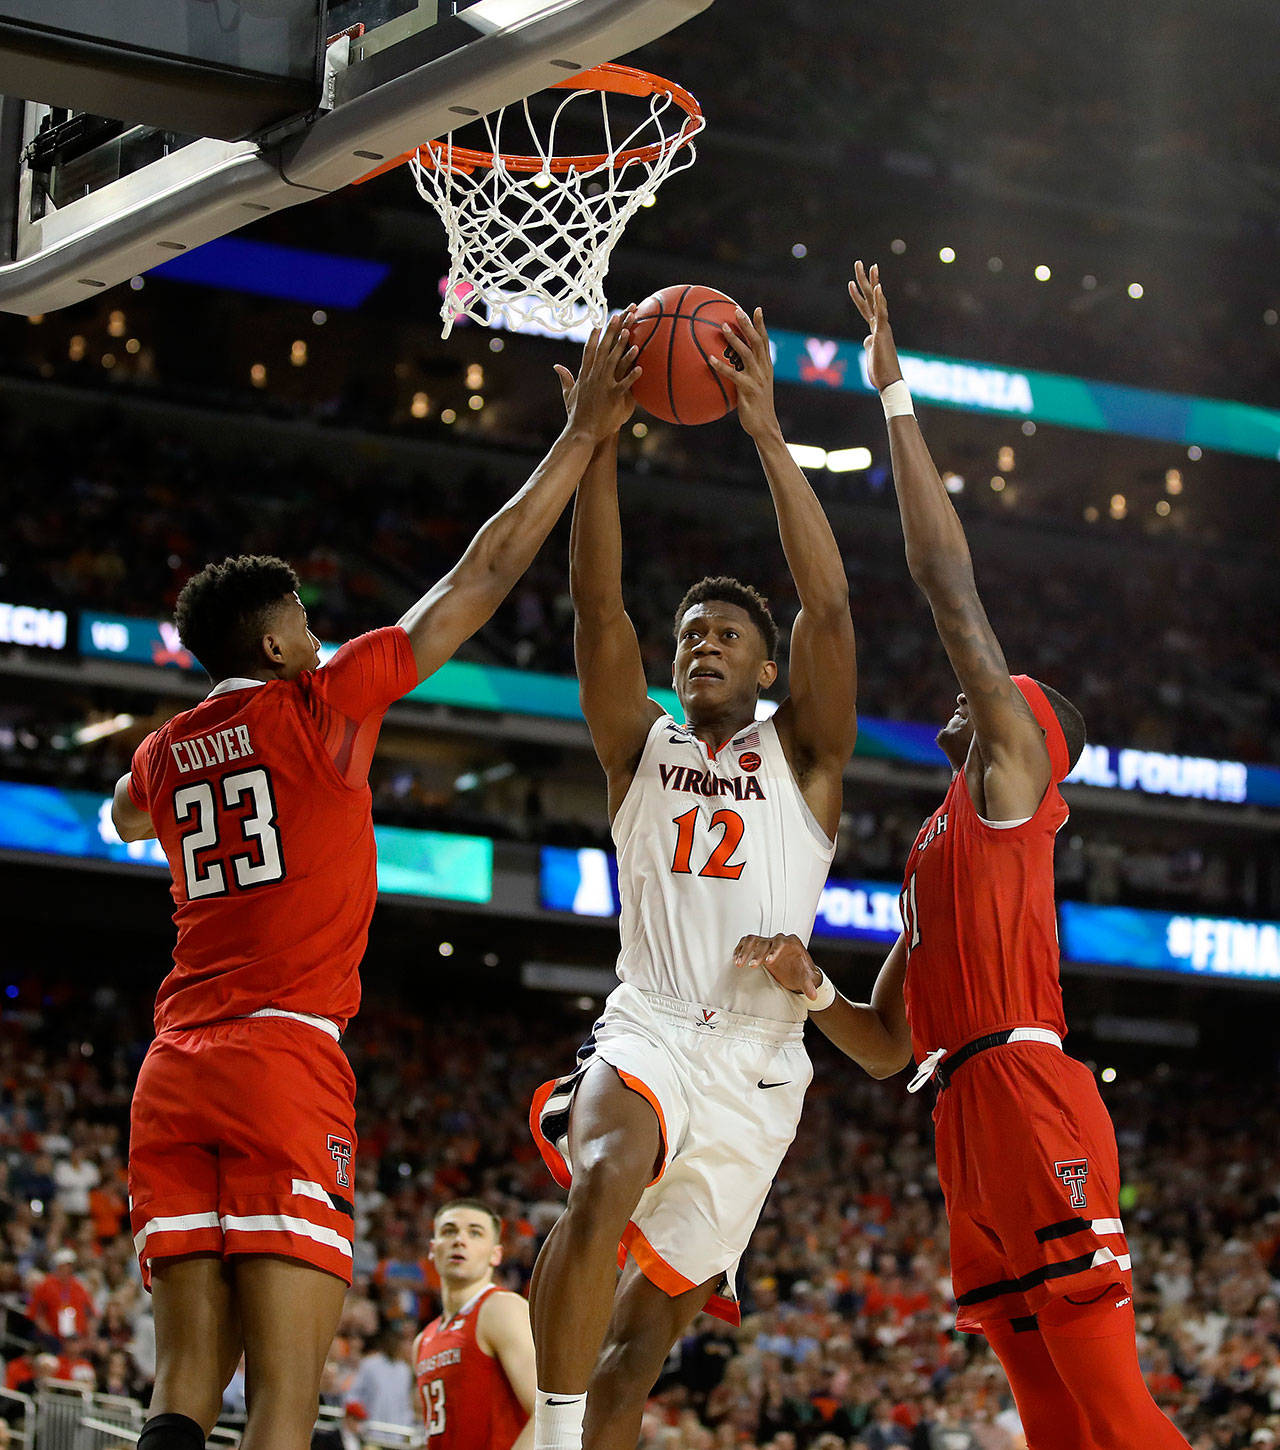 Virginia Cavaliers guard De’Andre Hunter (12) goes up for a shot between the defense of Texas Tech’s Jarrett Culver (23) and Tariq Owens (11) during the second half of the NCAA Championship Game on April 8, 2019 at U.S. Bank Stadium in Minneapolis, Minn. (Brian Peterson/Minneapolis Star Tribune/TNS)